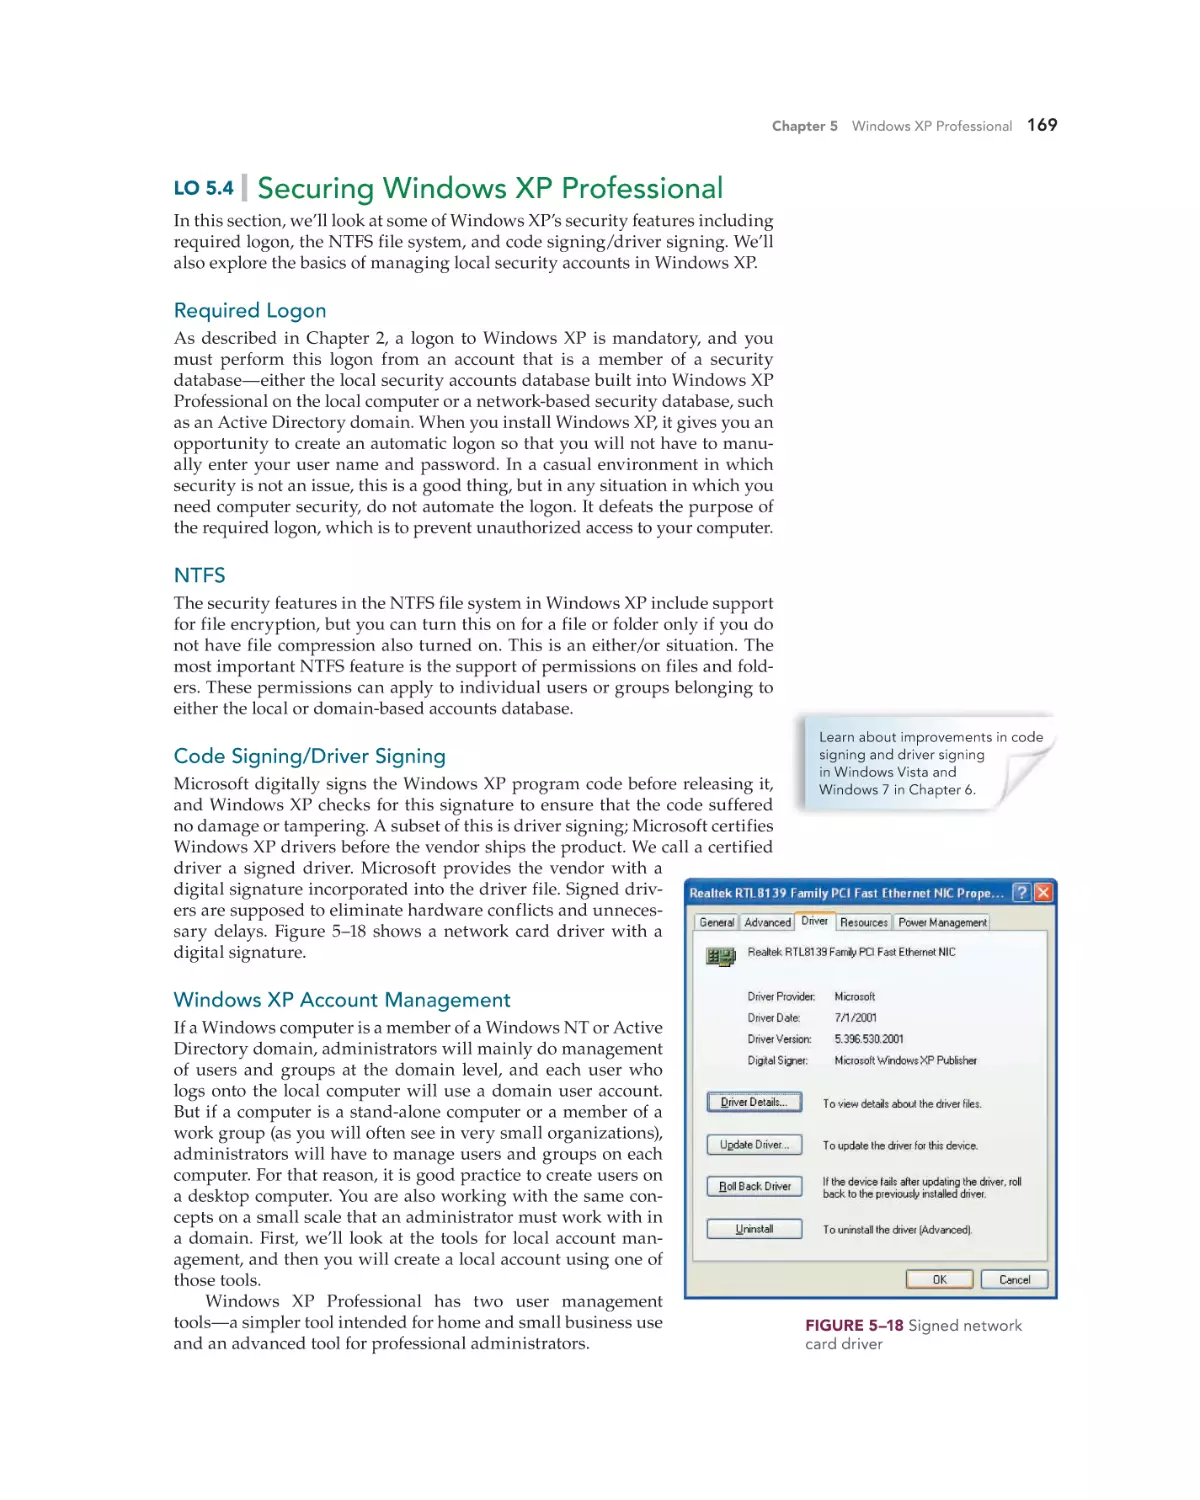 Securing Windows XP Professional
Required Logon
NTFS
Code Signing/Driver Signing
Windows XP Account Management